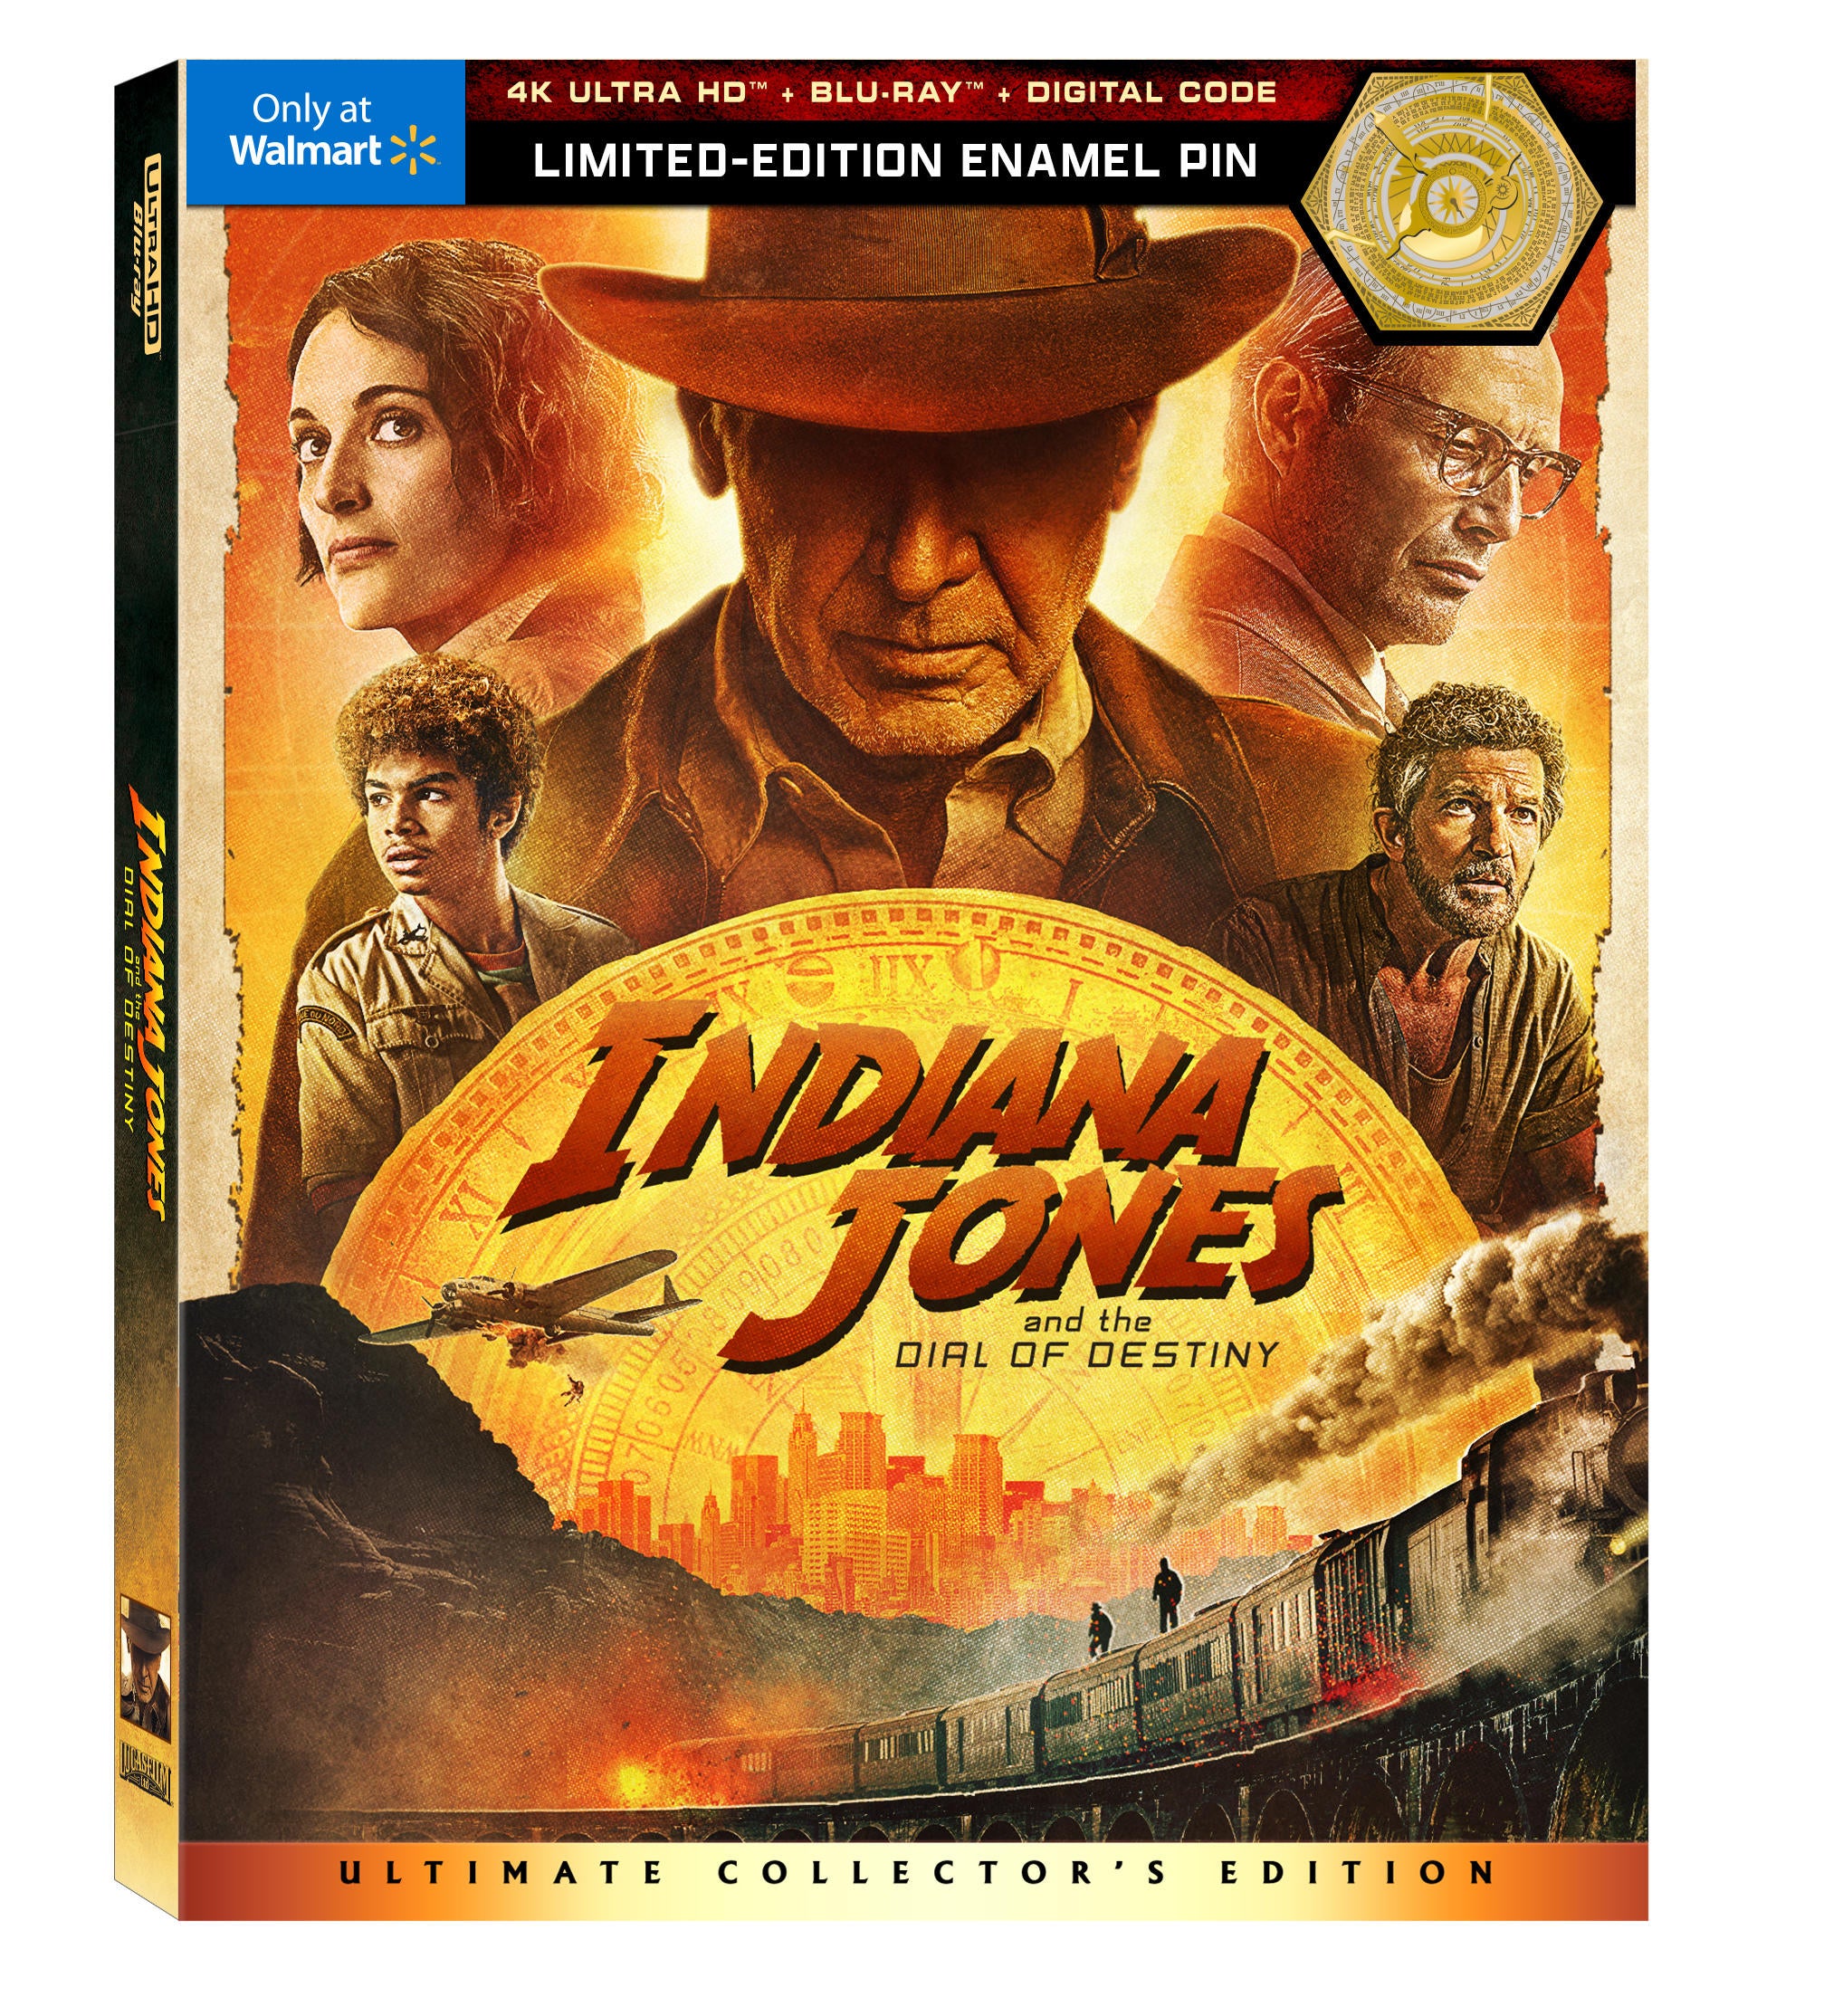 Indiana Jones and the Dial of Destiny Gets 4K Ultra and Blu-ray